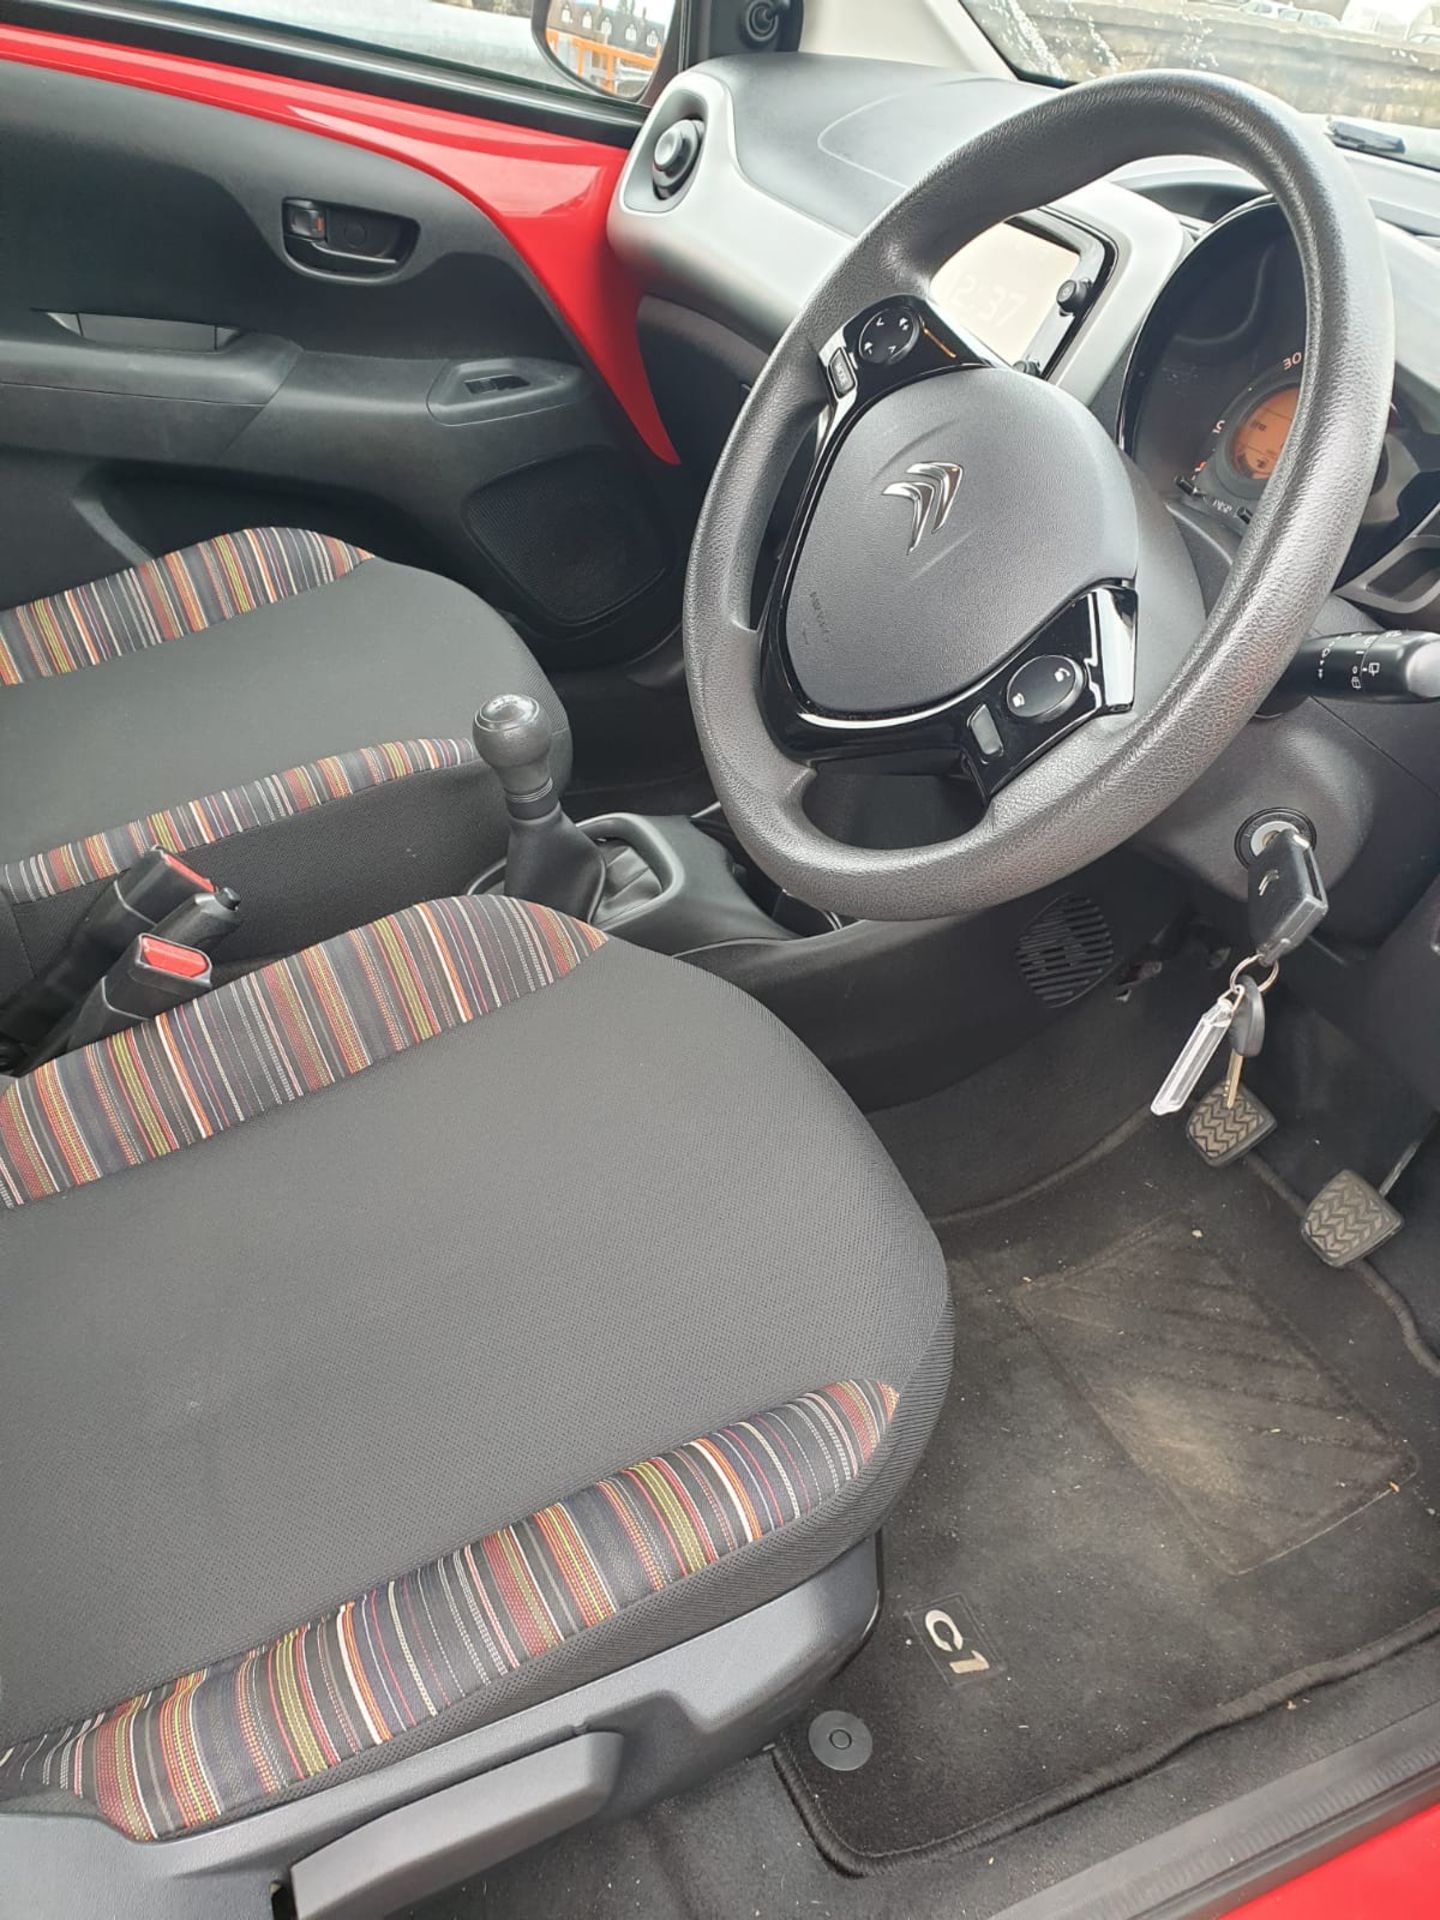 CITROEN C1 FEEL ML64 UHS COLLECTION LEICESTER - Image 8 of 10